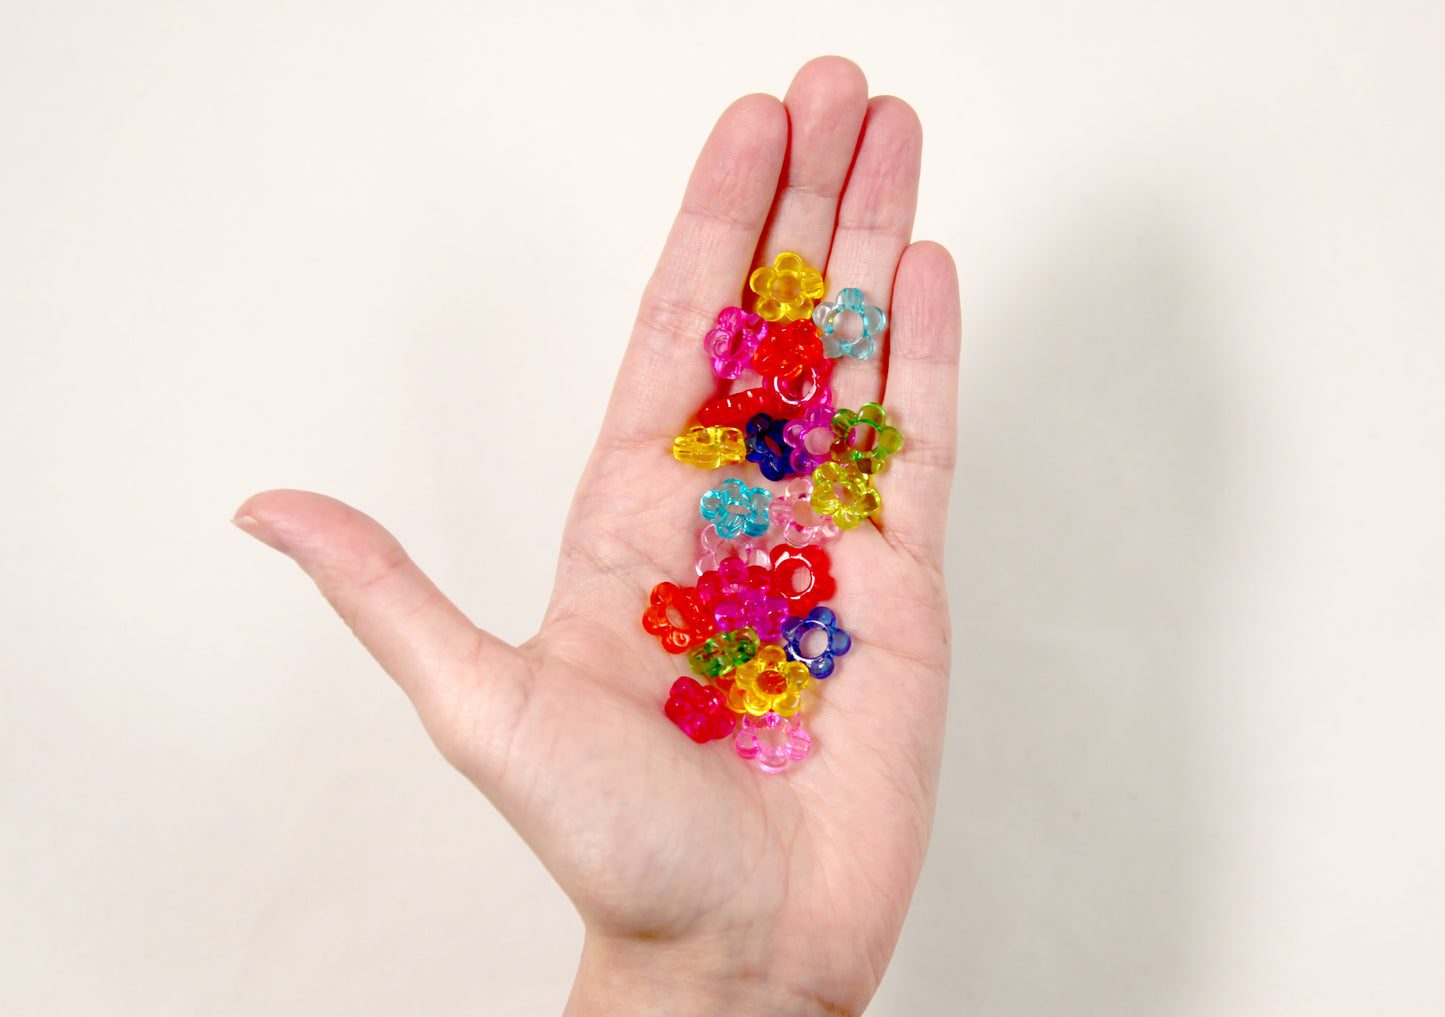 Flower Beads - 12mm Small Transparent Outline Flower Frame Iridescent Color Plastic Acrylic or Resin Beads – 150 pc set